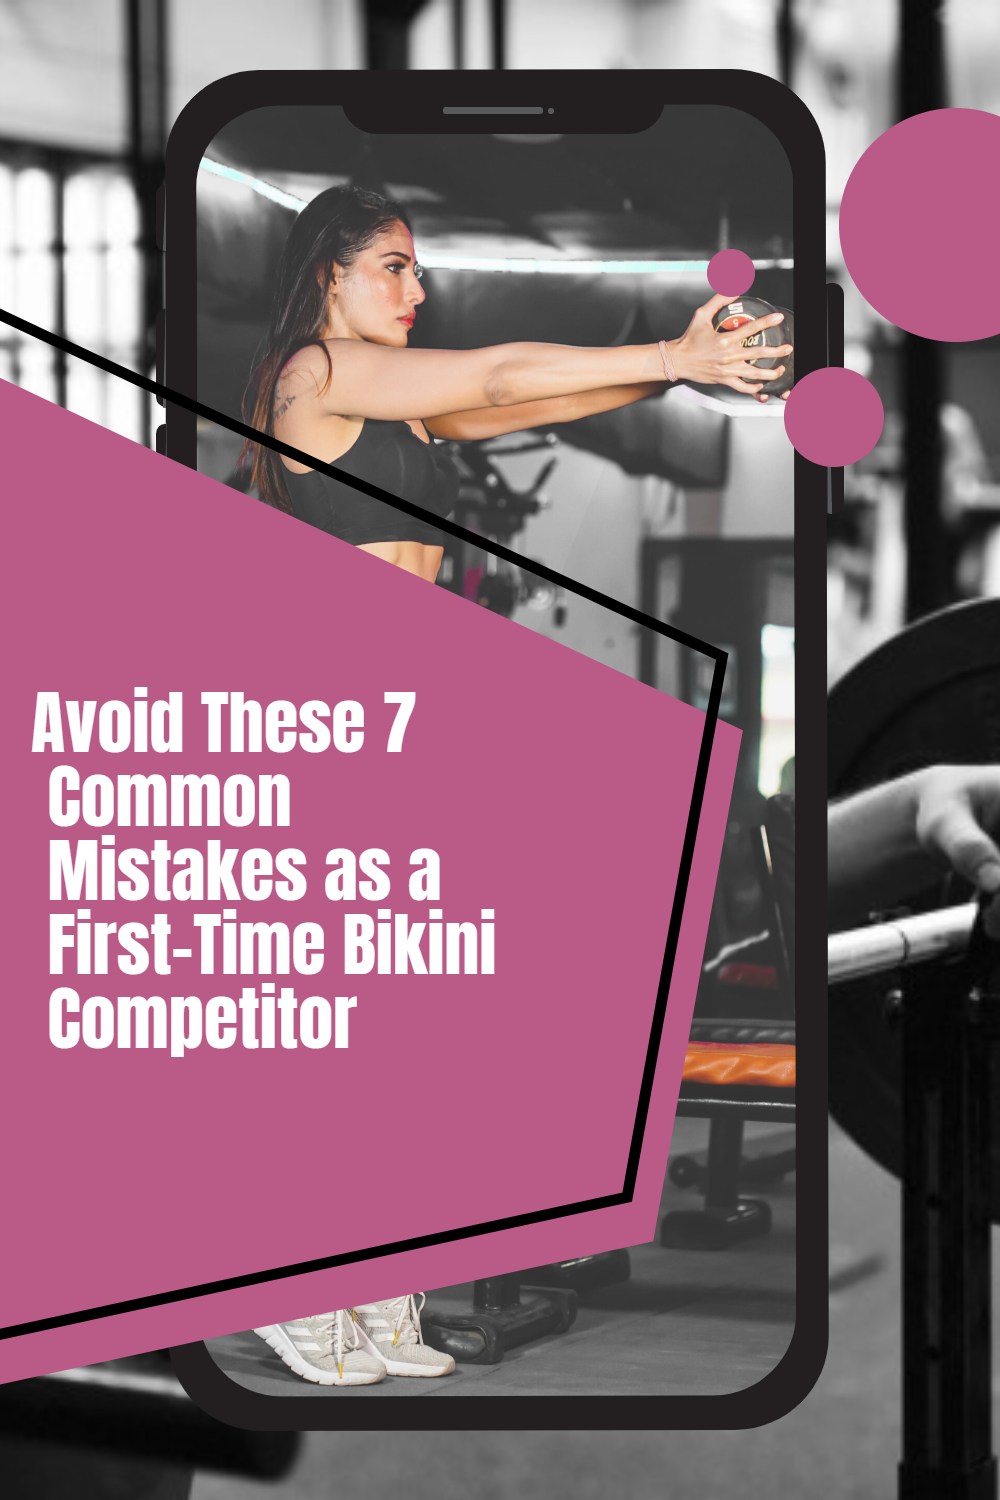 Avoid These 7 Common Mistakes as a First-Time Bikini Competitor